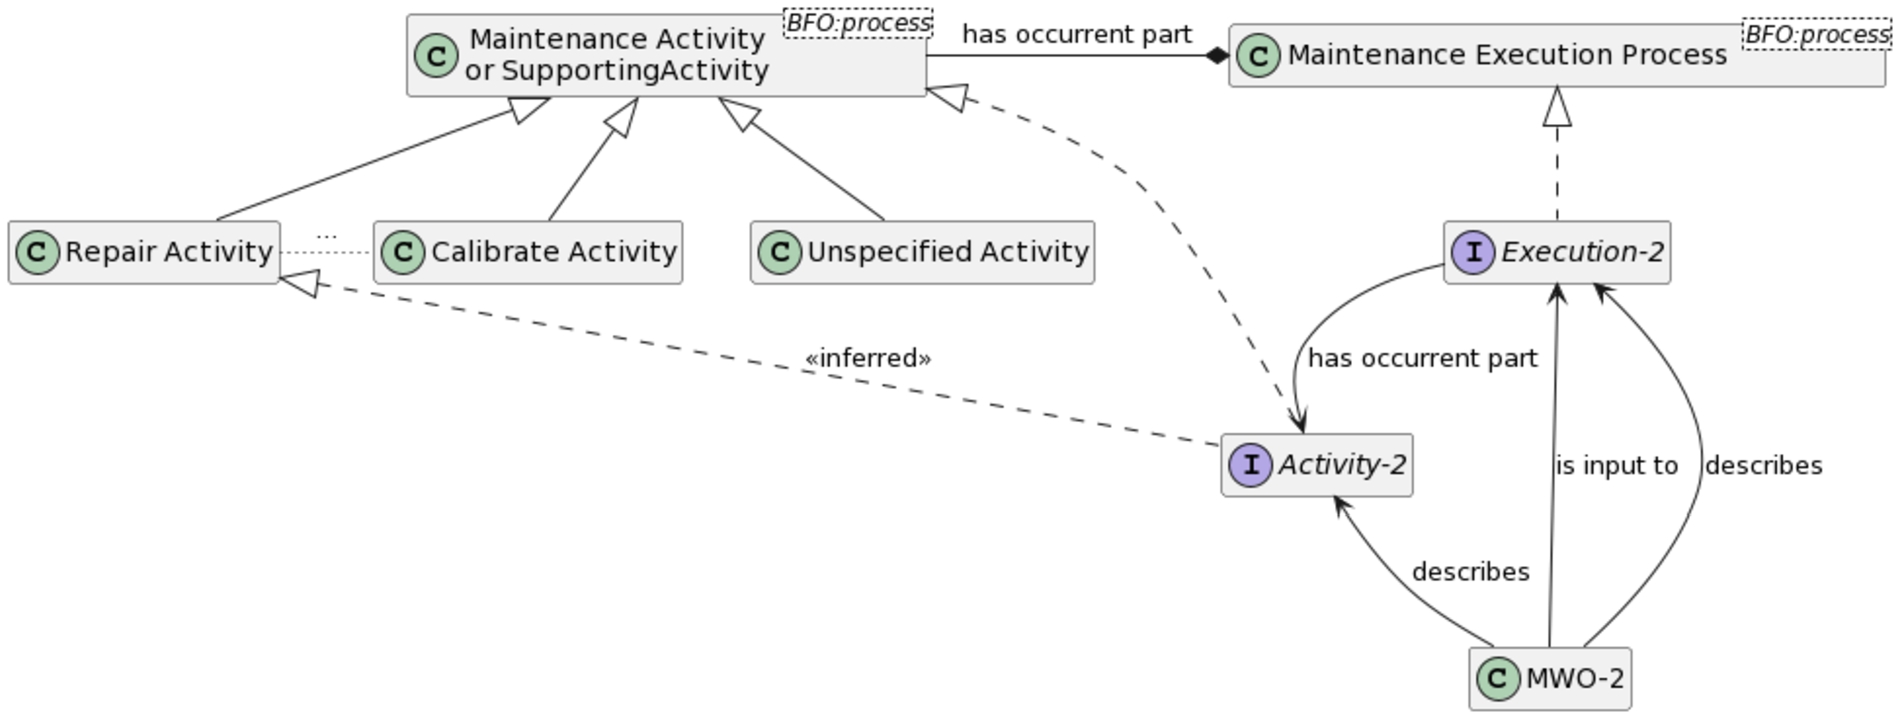 A conceptual diagram of maintenance work order execution processes and activities in the application-level ontology.